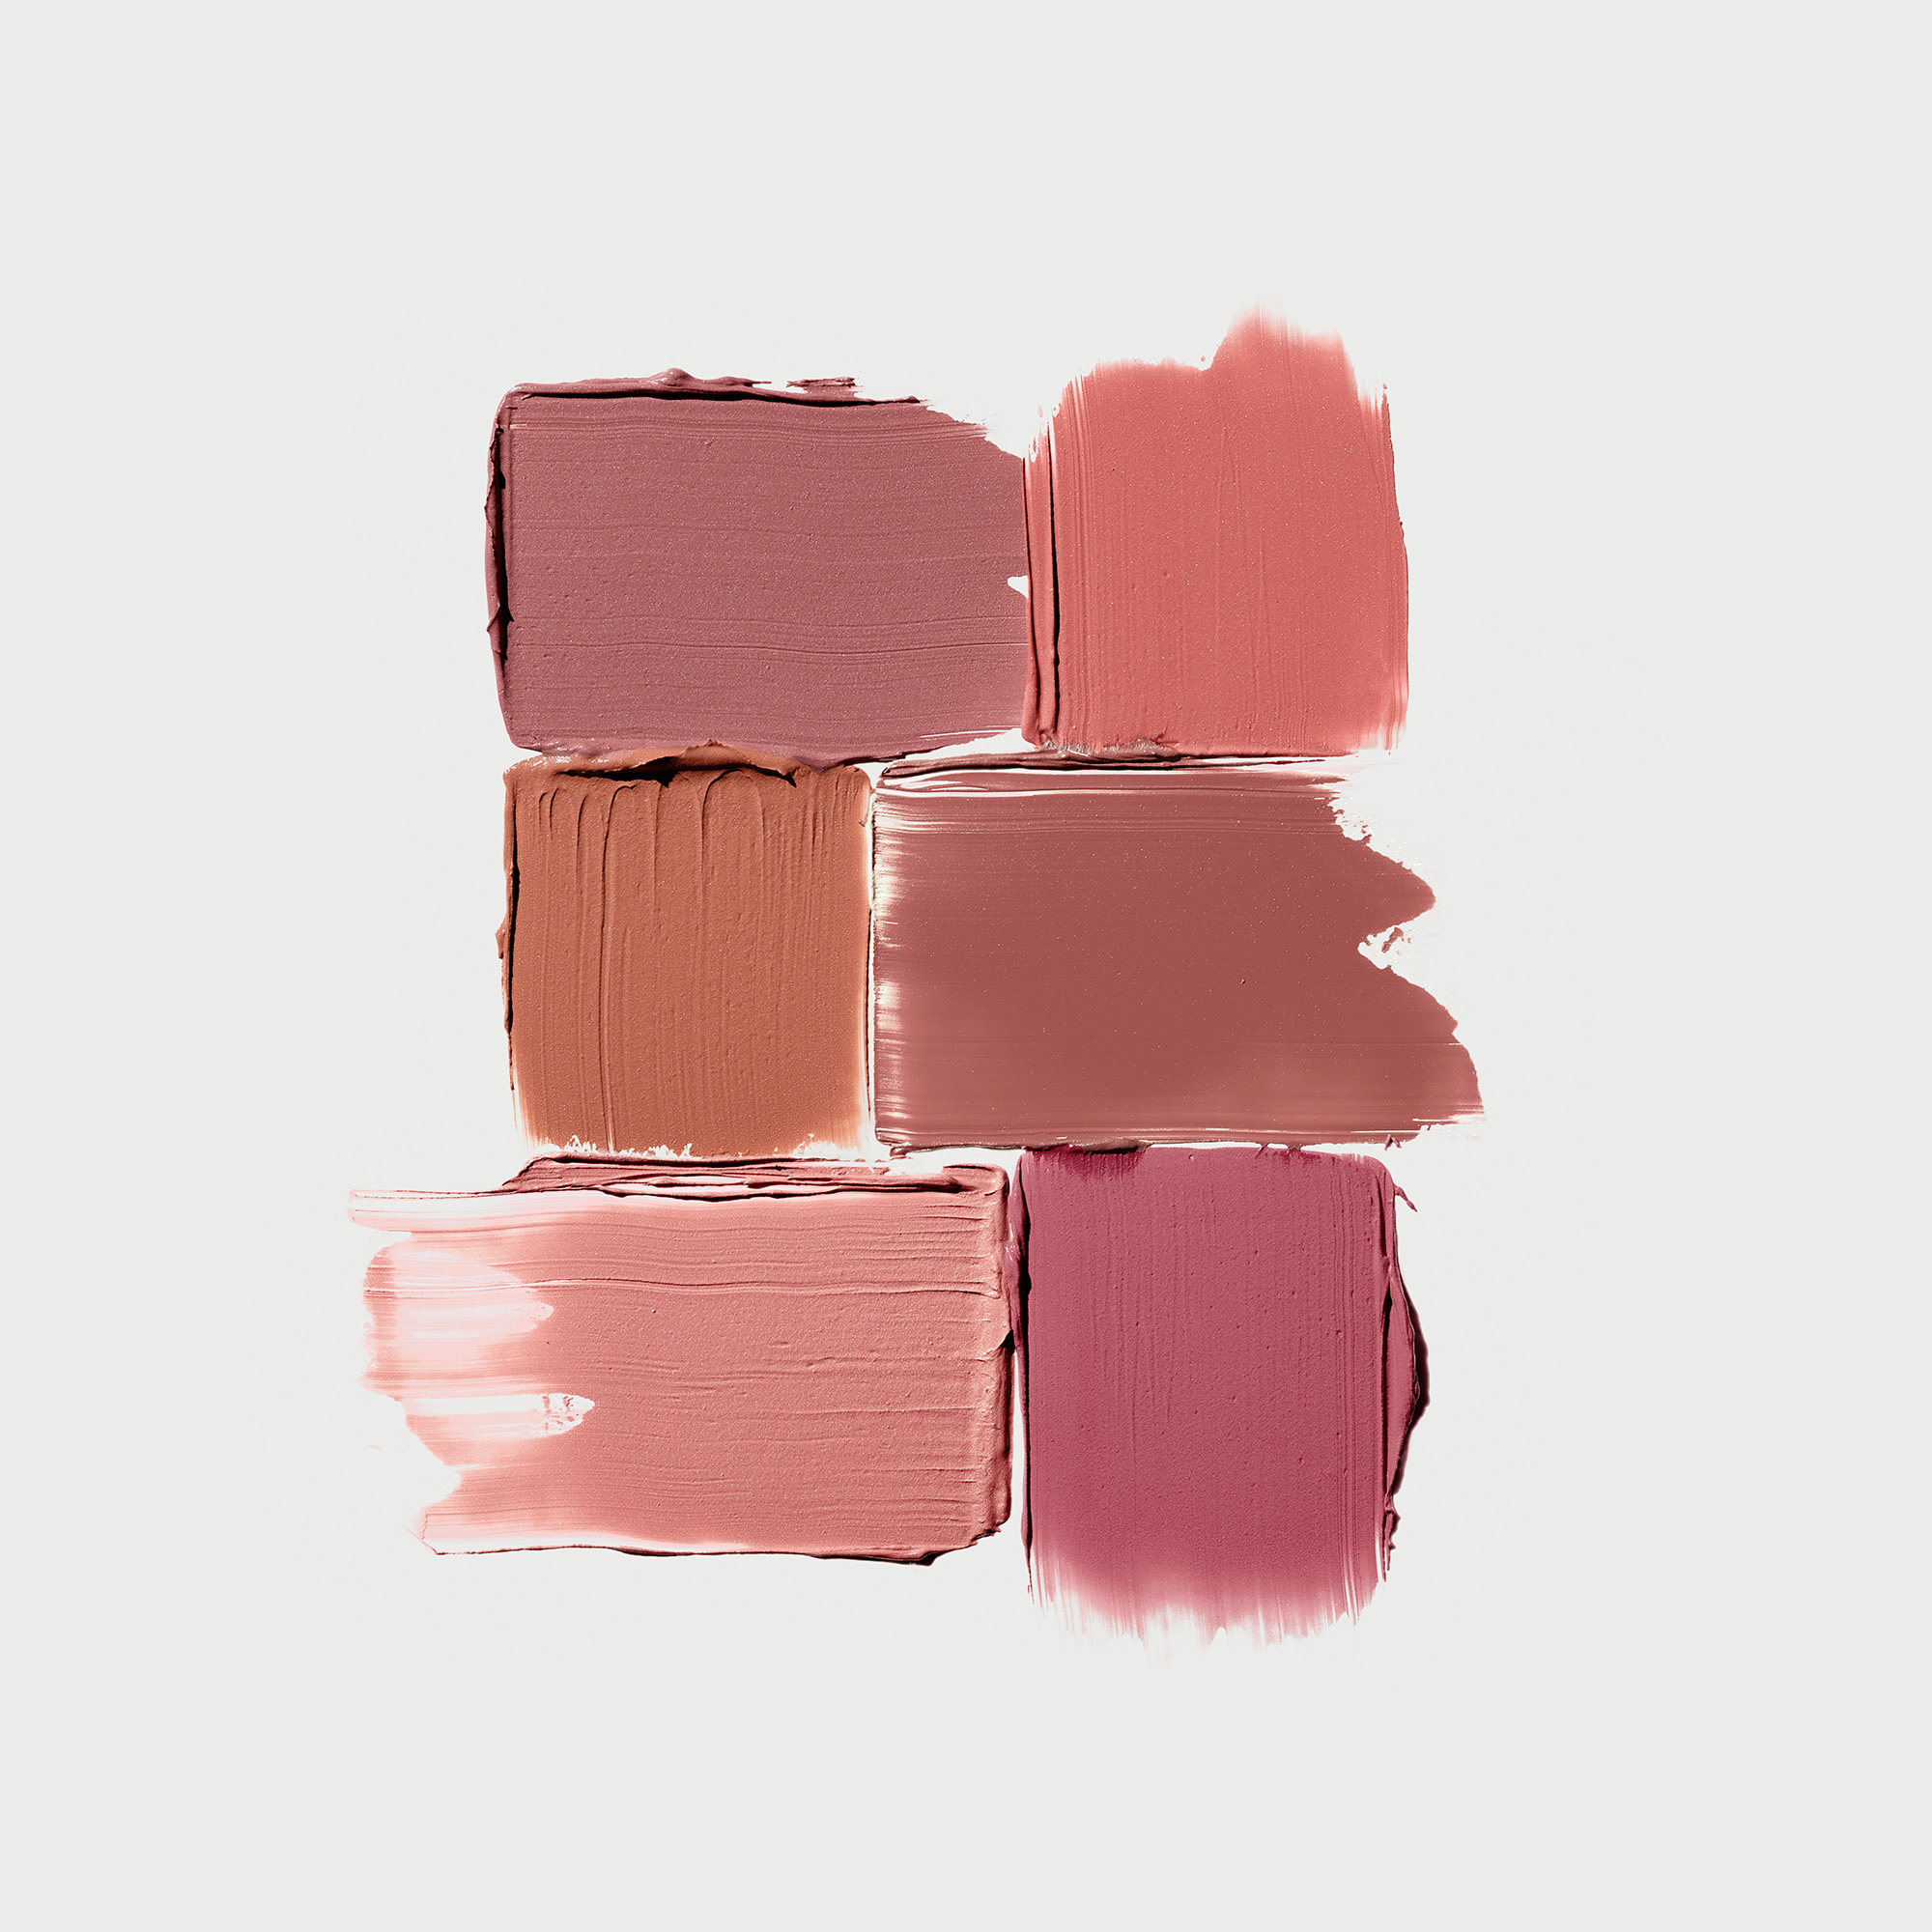 Product swatch of the 6 new cream blush shades on a grey background.